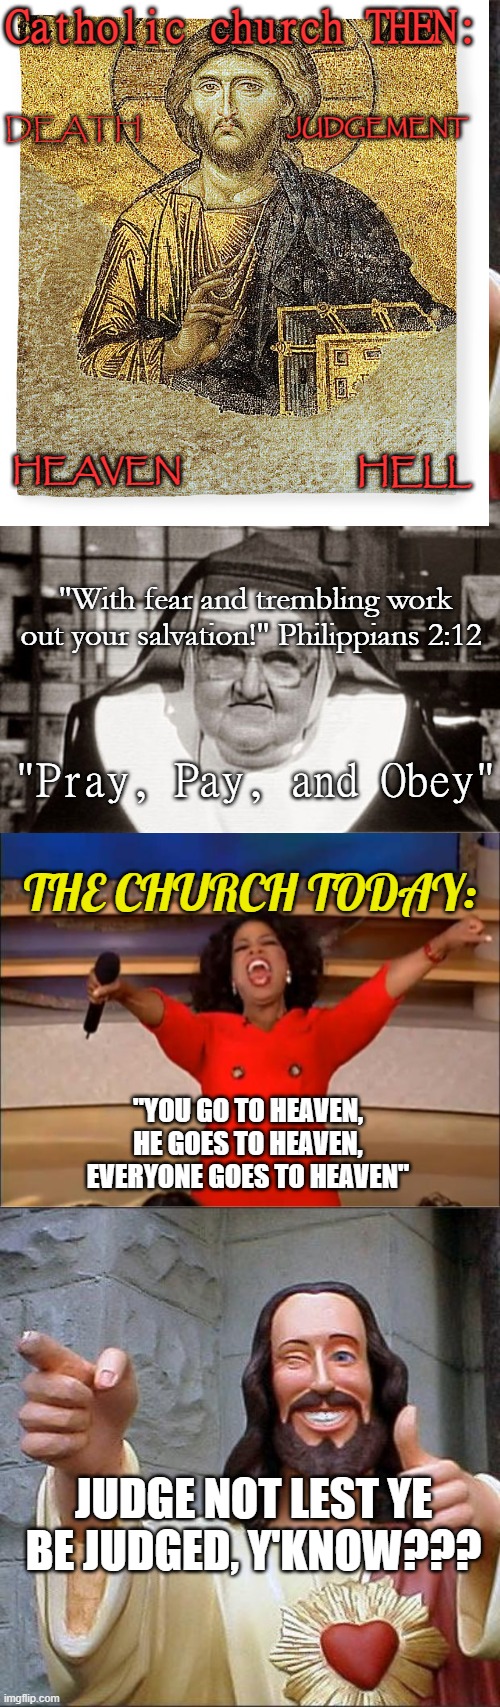 Impressions of the Catholic Church, Then and Now | Catholic church THEN:; JUDGEMENT; DEATH; HEAVEN; HELL; "With fear and trembling work out your salvation!" Philippians 2:12; "Pray, Pay, and Obey"; THE CHURCH TODAY:; "YOU GO TO HEAVEN, HE GOES TO HEAVEN, EVERYONE GOES TO HEAVEN"; JUDGE NOT LEST YE BE JUDGED, Y'KNOW??? | image tagged in memes,buddy christ,frowning nun,oprah you get a | made w/ Imgflip meme maker